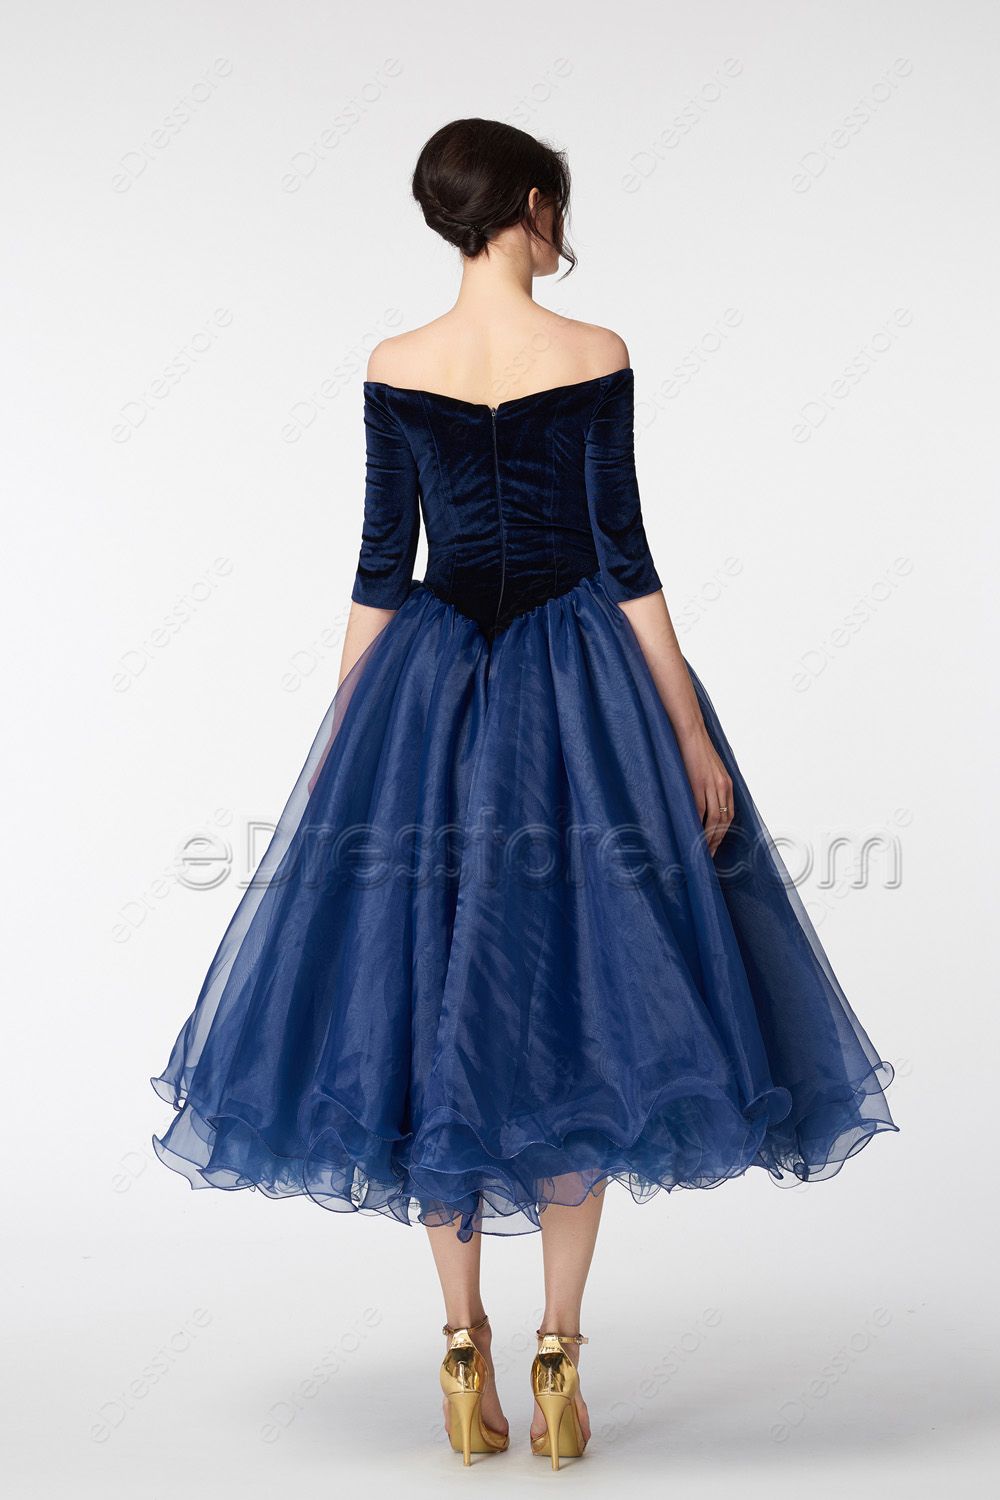 Navy Blue Off the Shoulder Ball Gown VIntage Prom Dress with Sleeves ...